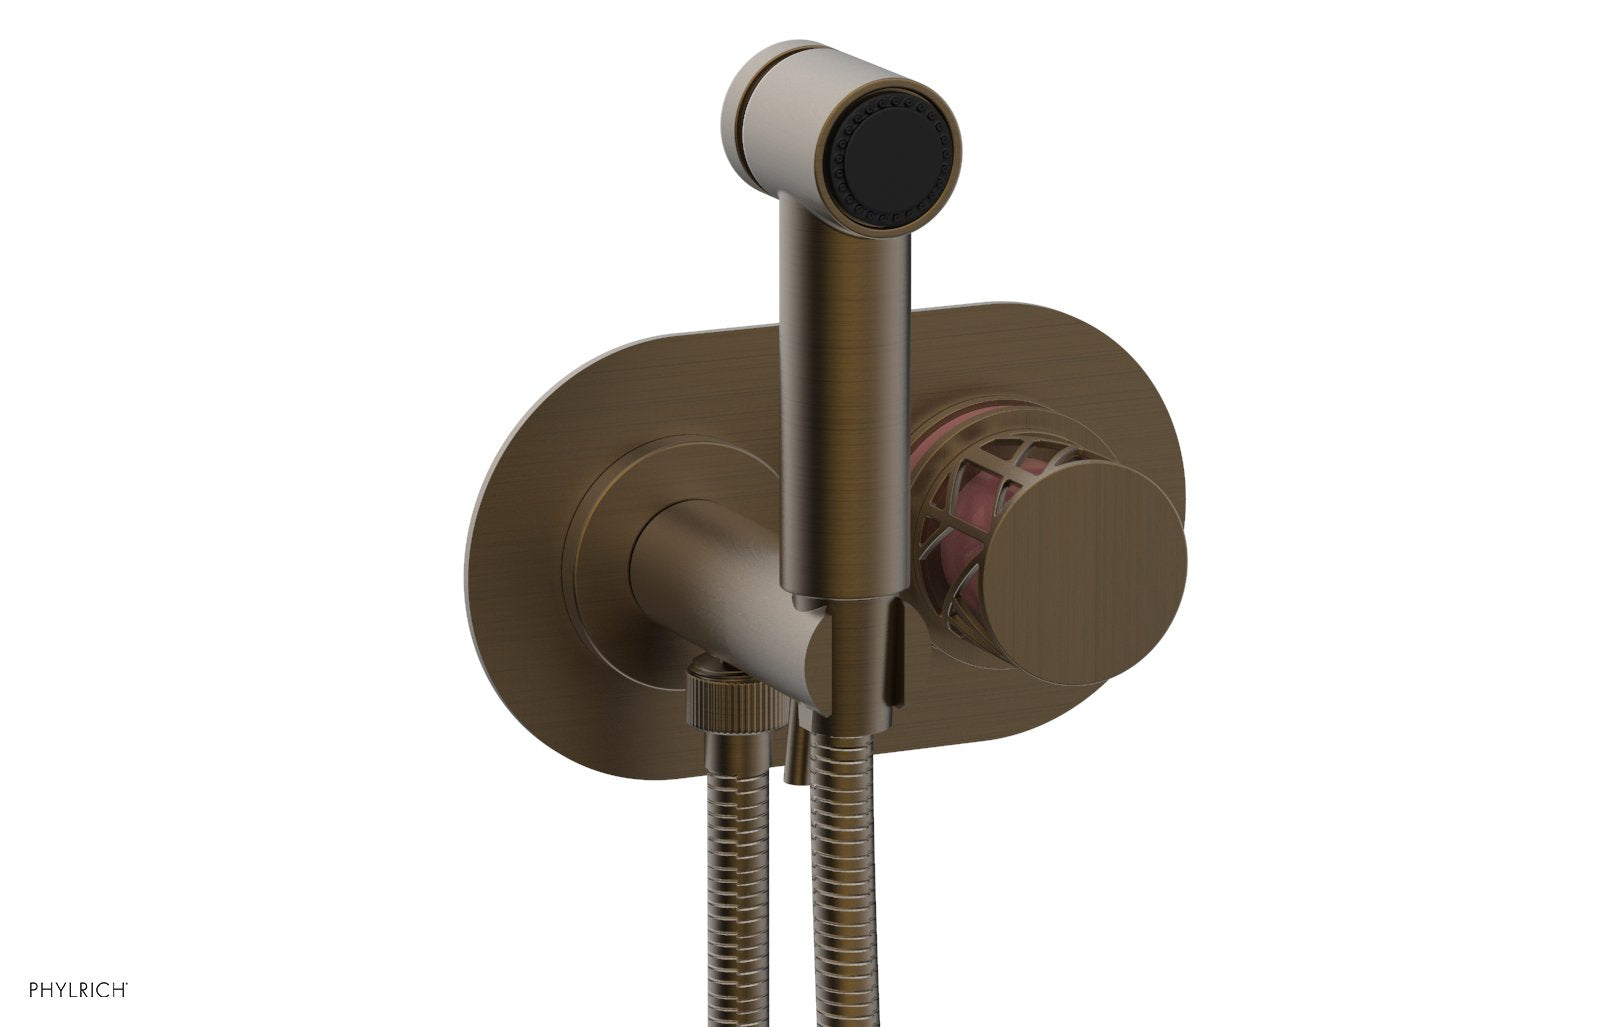 Phylrich JOLIE Wall Mounted Bidet, Round Handle with "Pink" Accents